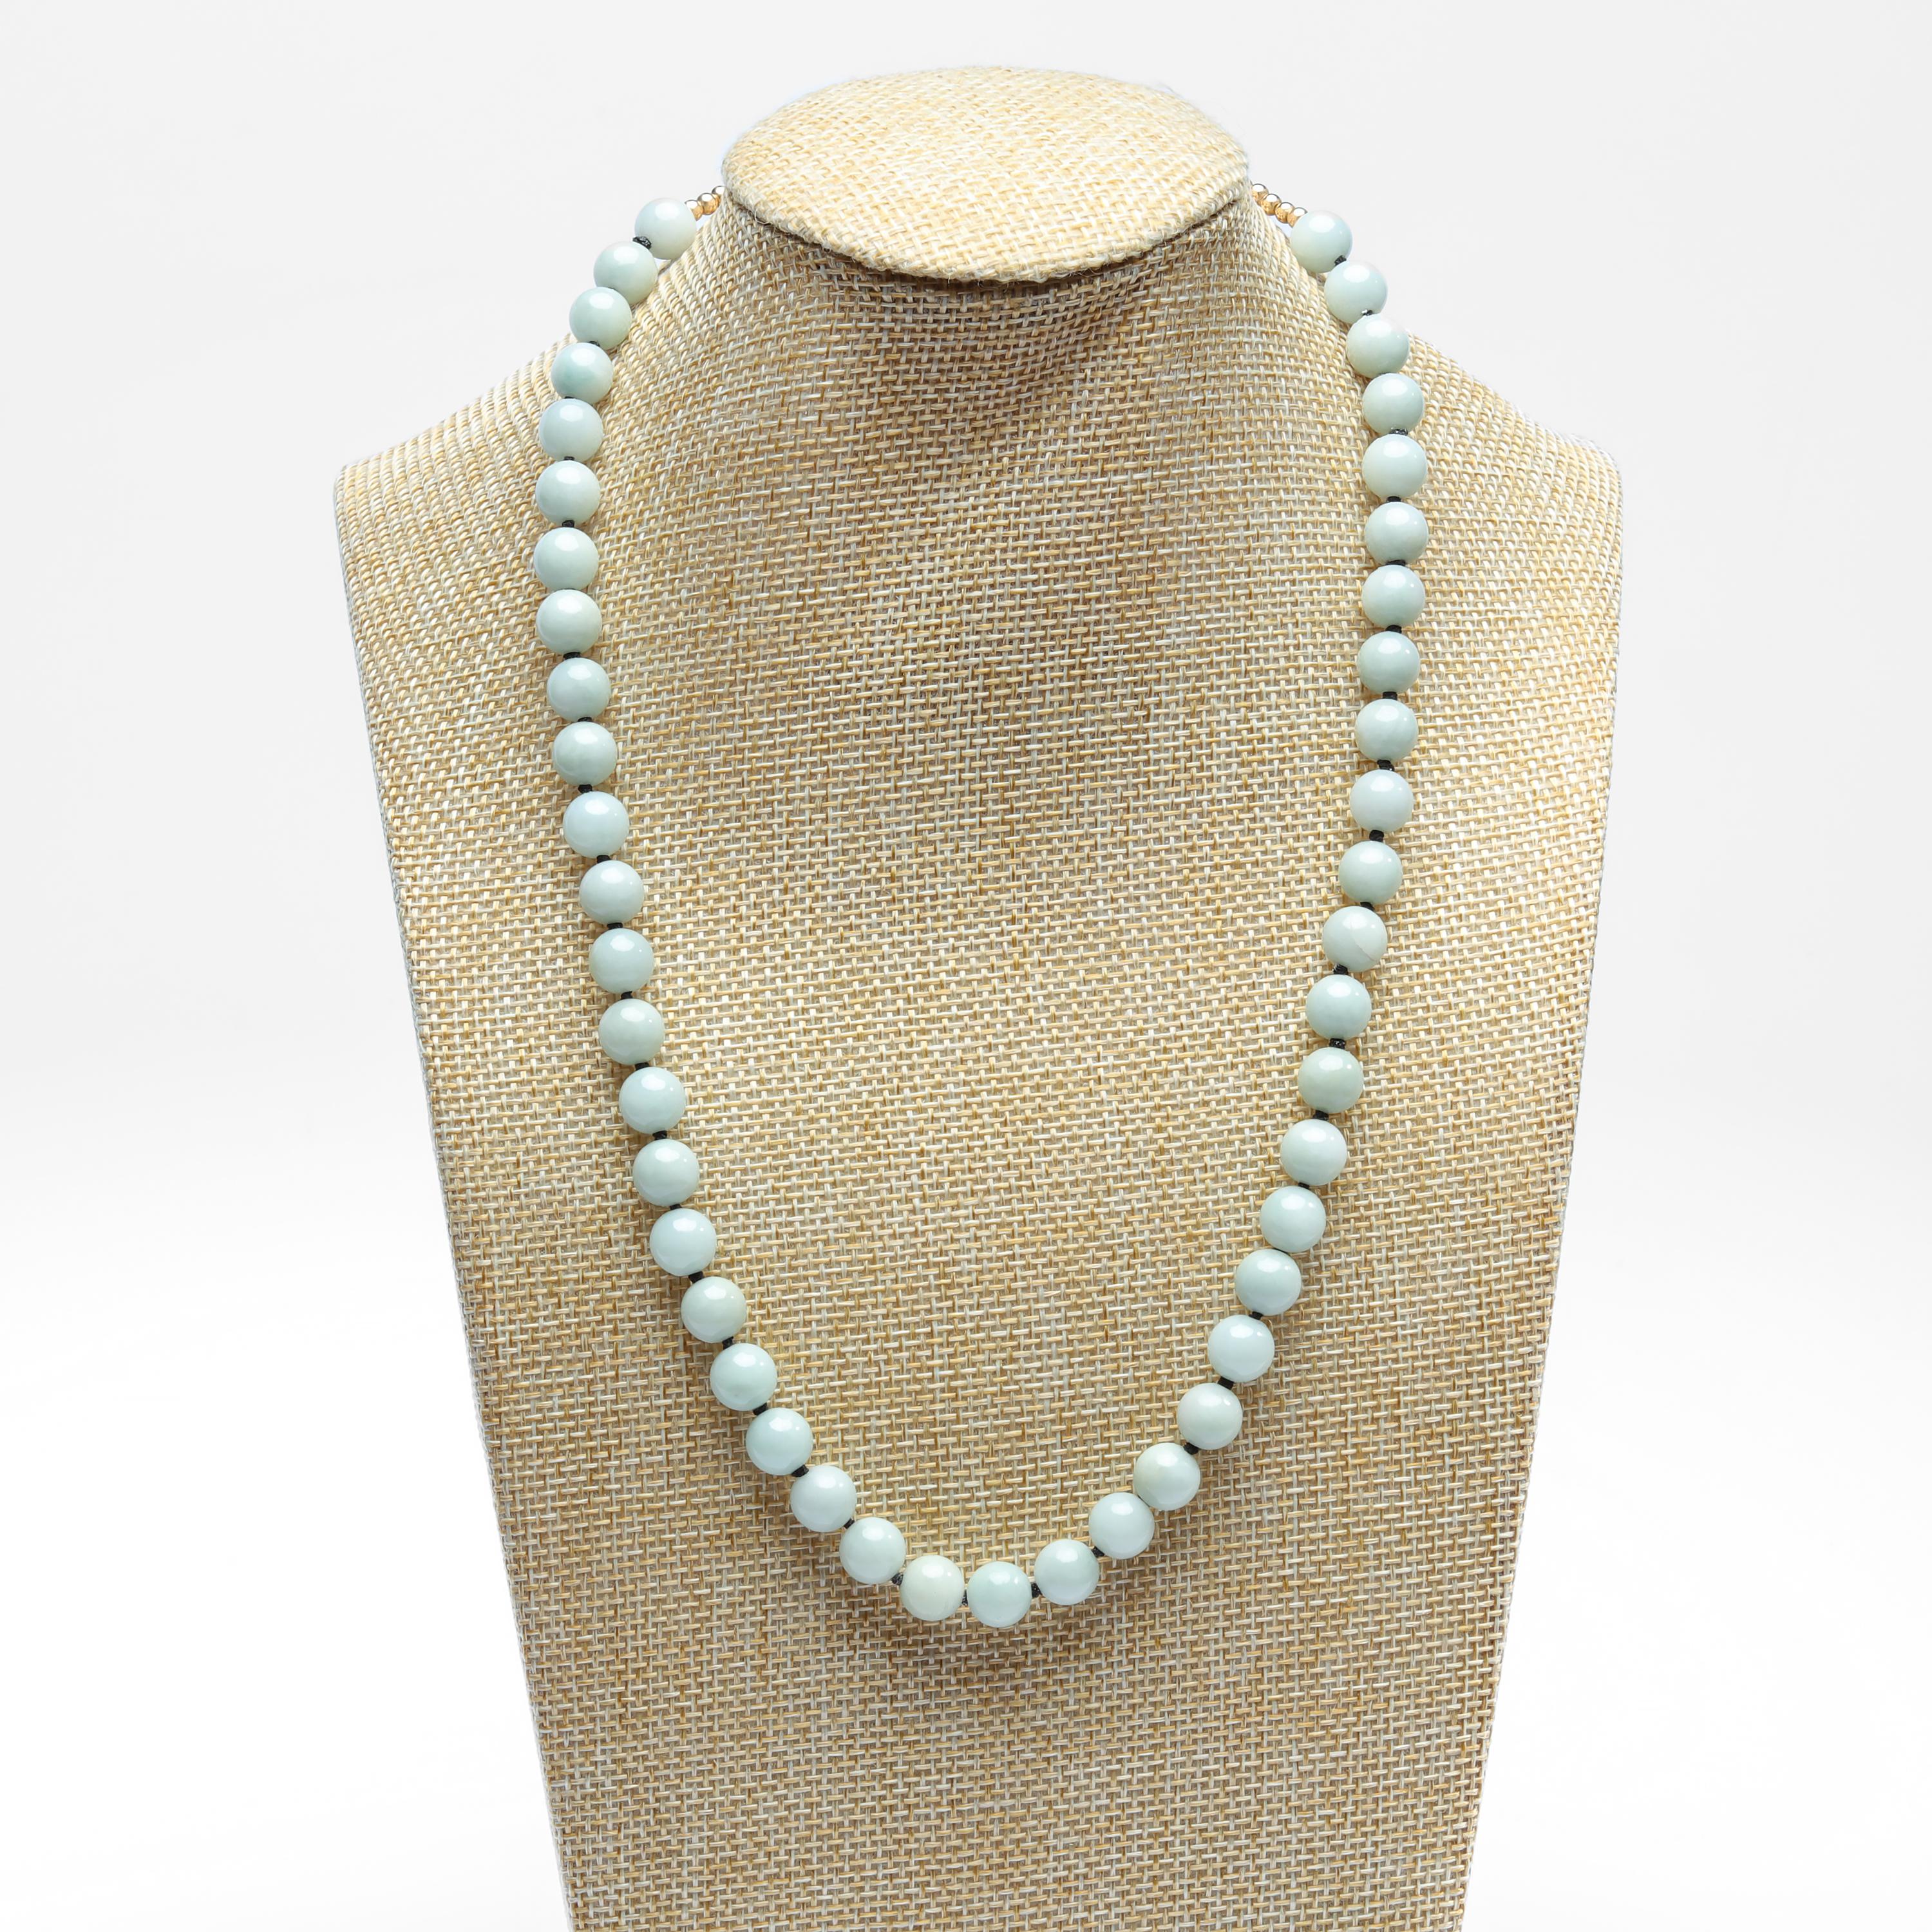 Jade Necklace of Soft Bluish-Green Jadeite is Unexpectedly Sublime 4